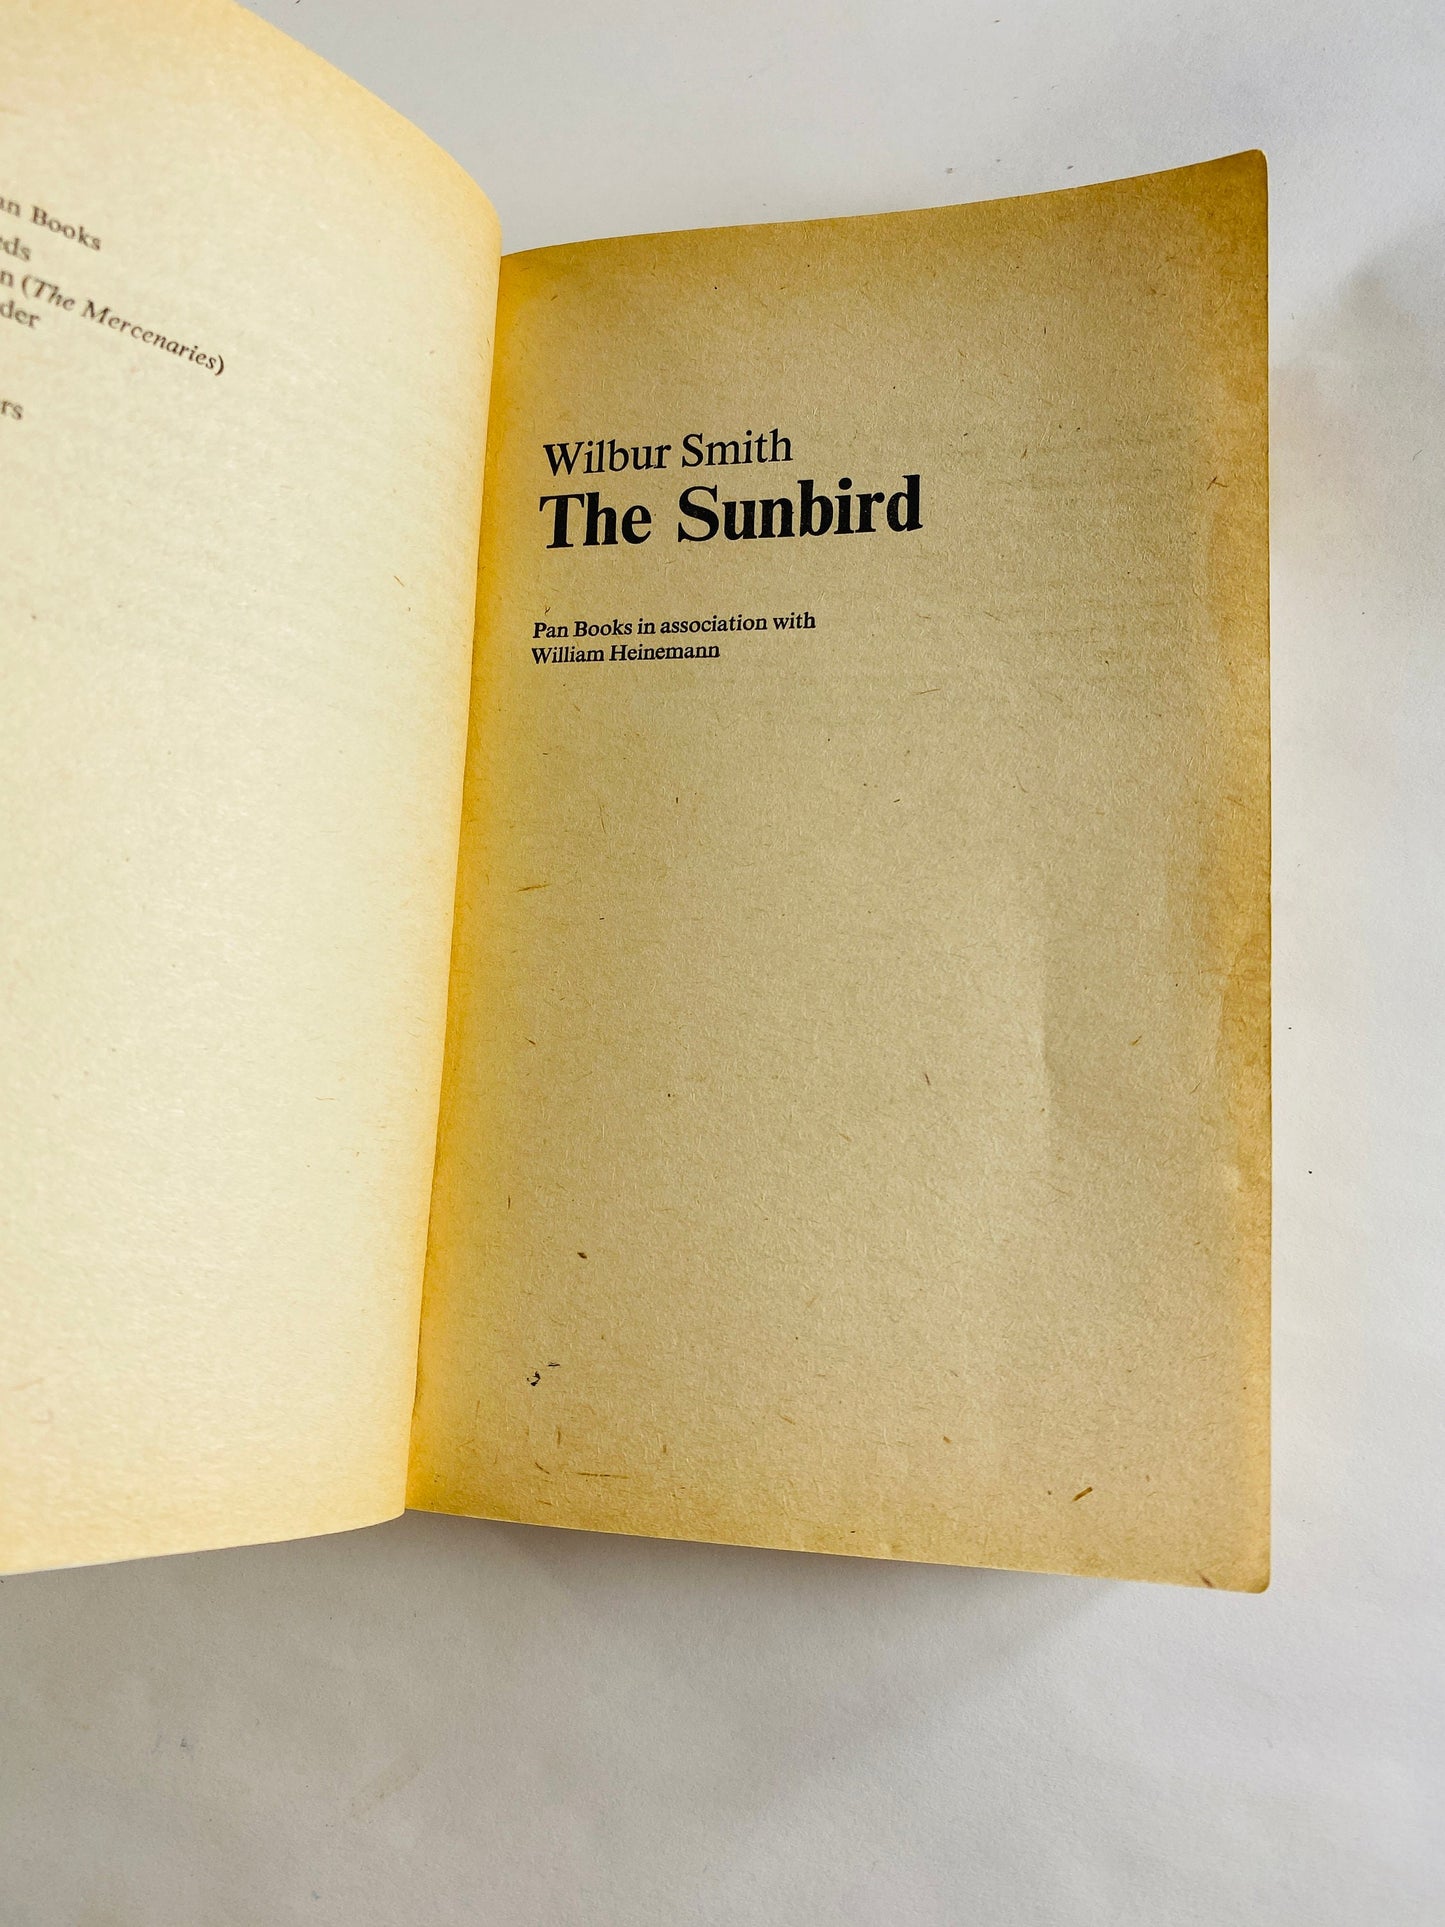 Sunbird vintage paperback book by Wilbur Smith circa 1974 by the author of When the Lion Feeds about adventure in modern Africa